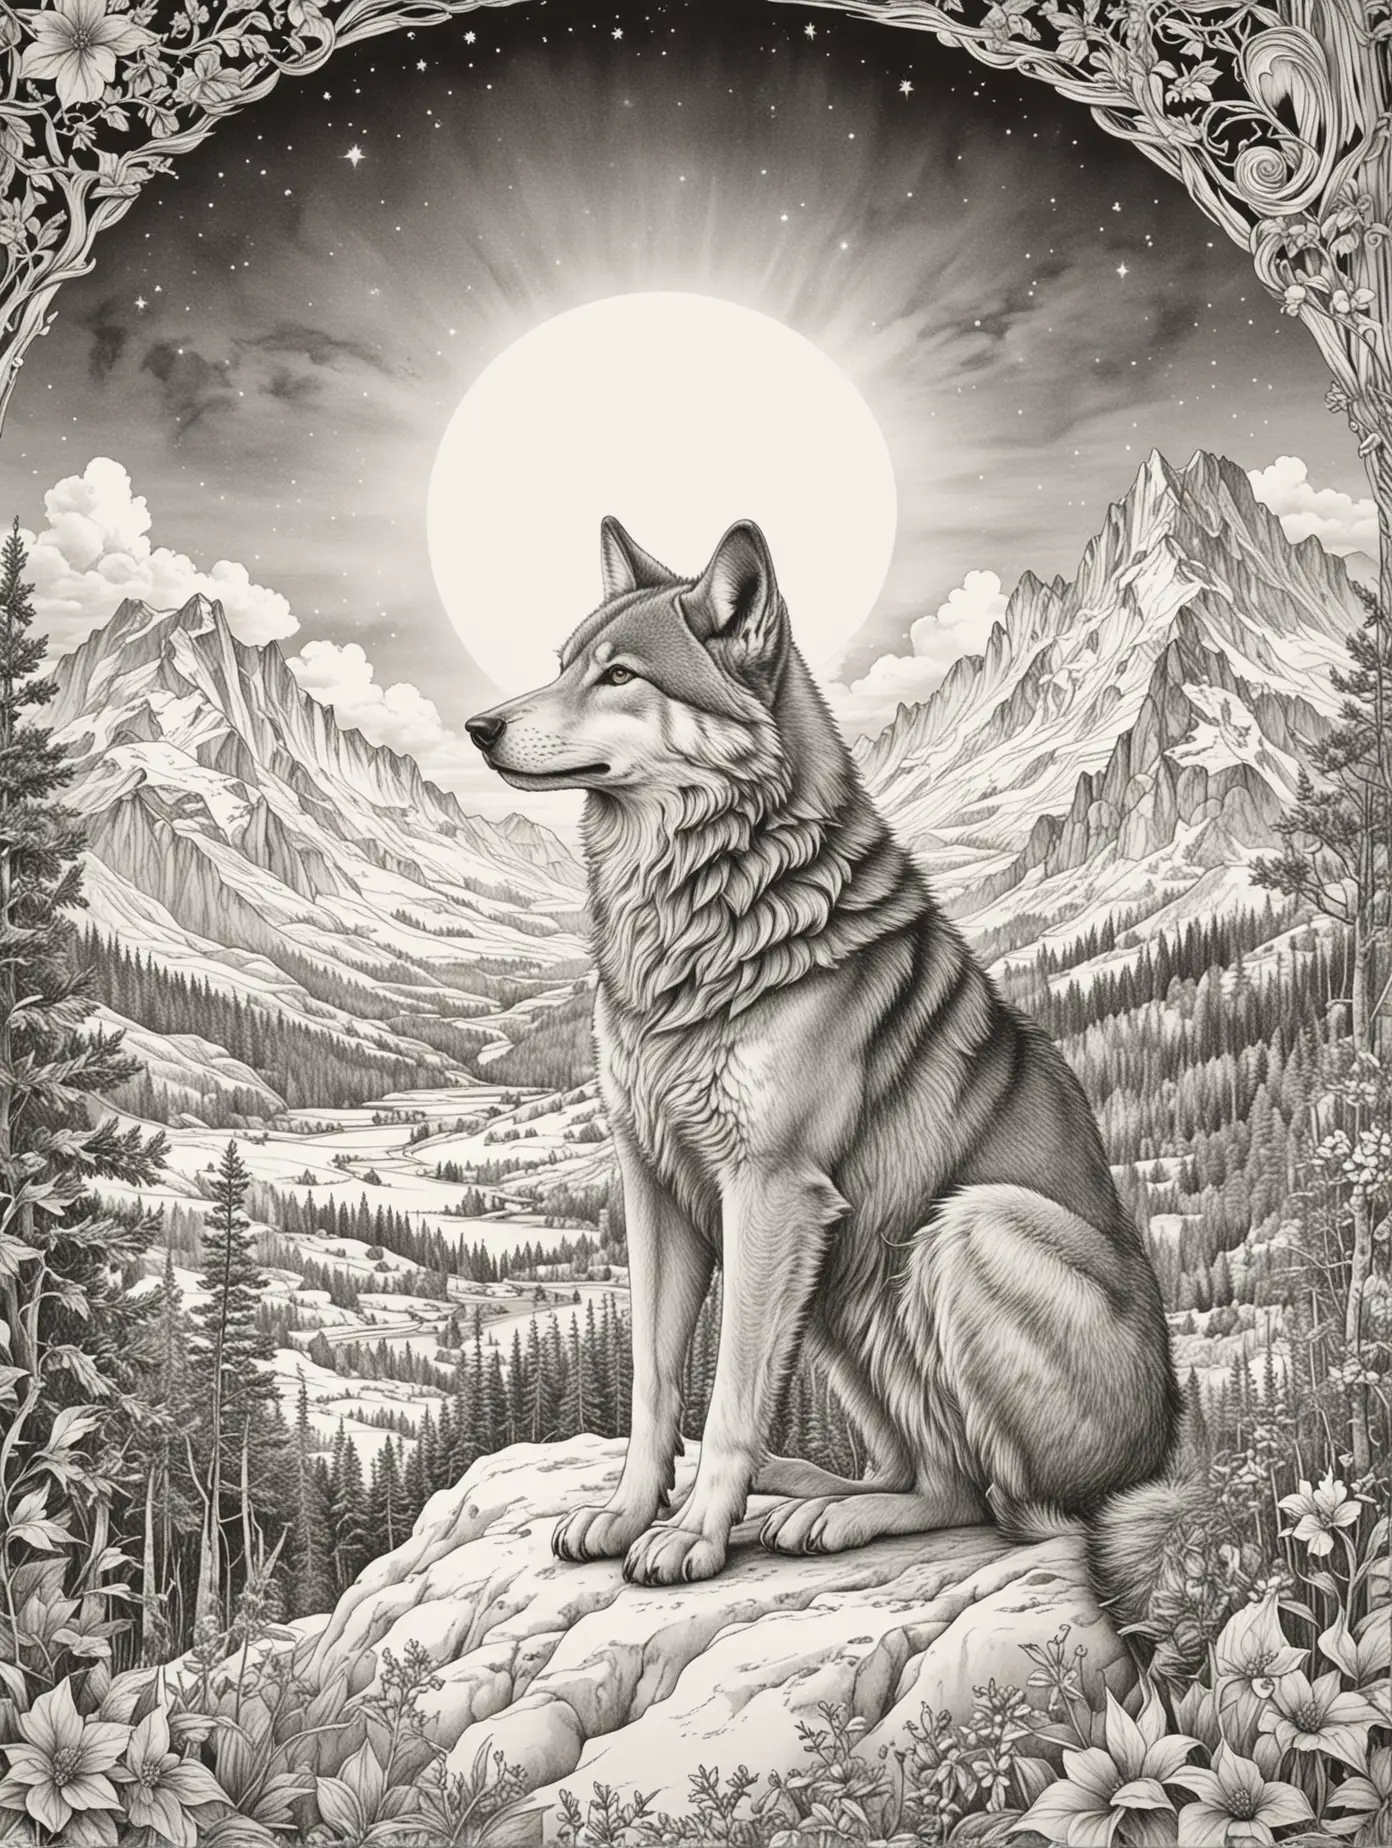 Vintage Fairytale Coloring Book Lone Wolf Gazing at Moon over Snowy Mountains